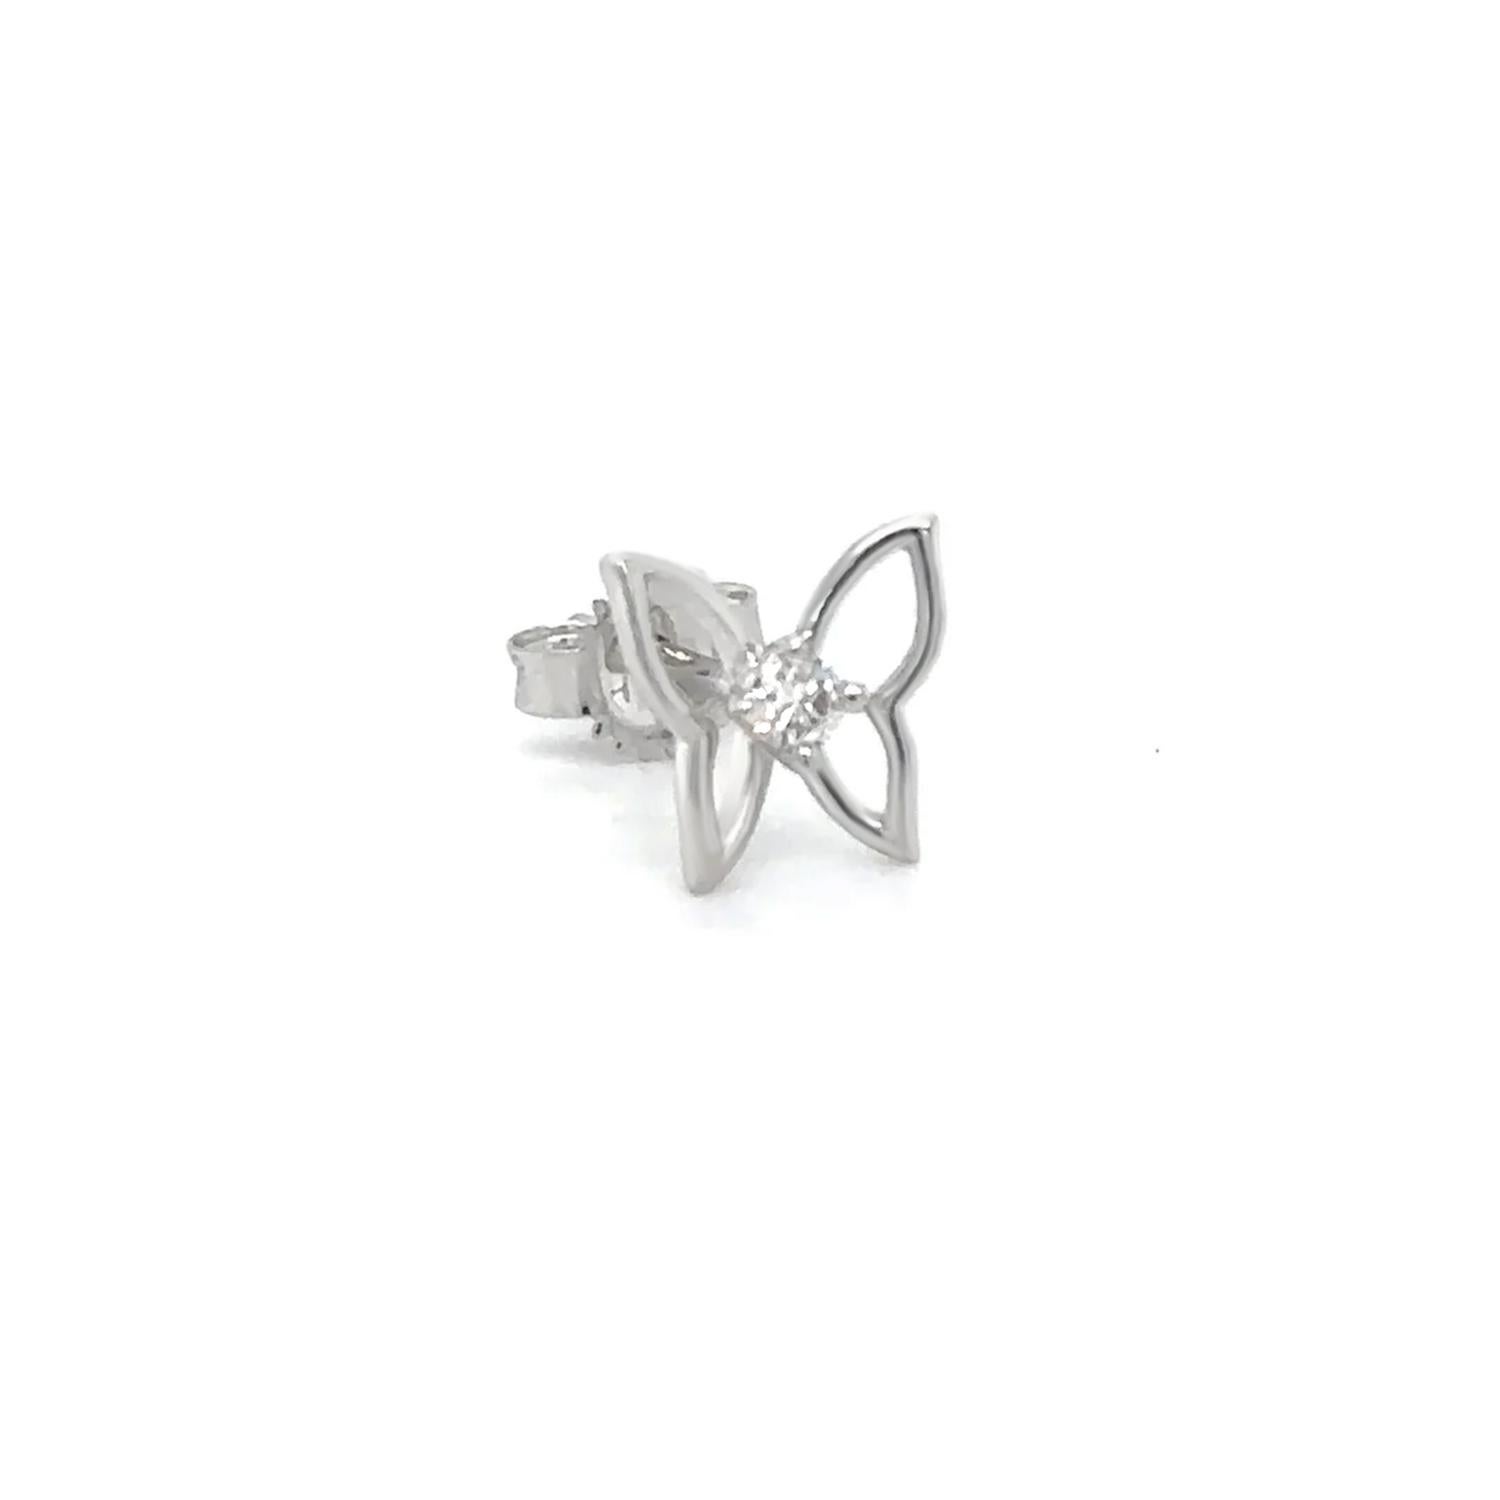 Diamond Butterfly Stud Earrings 14K White Gold In Excellent Condition For Sale In Laguna Niguel, CA